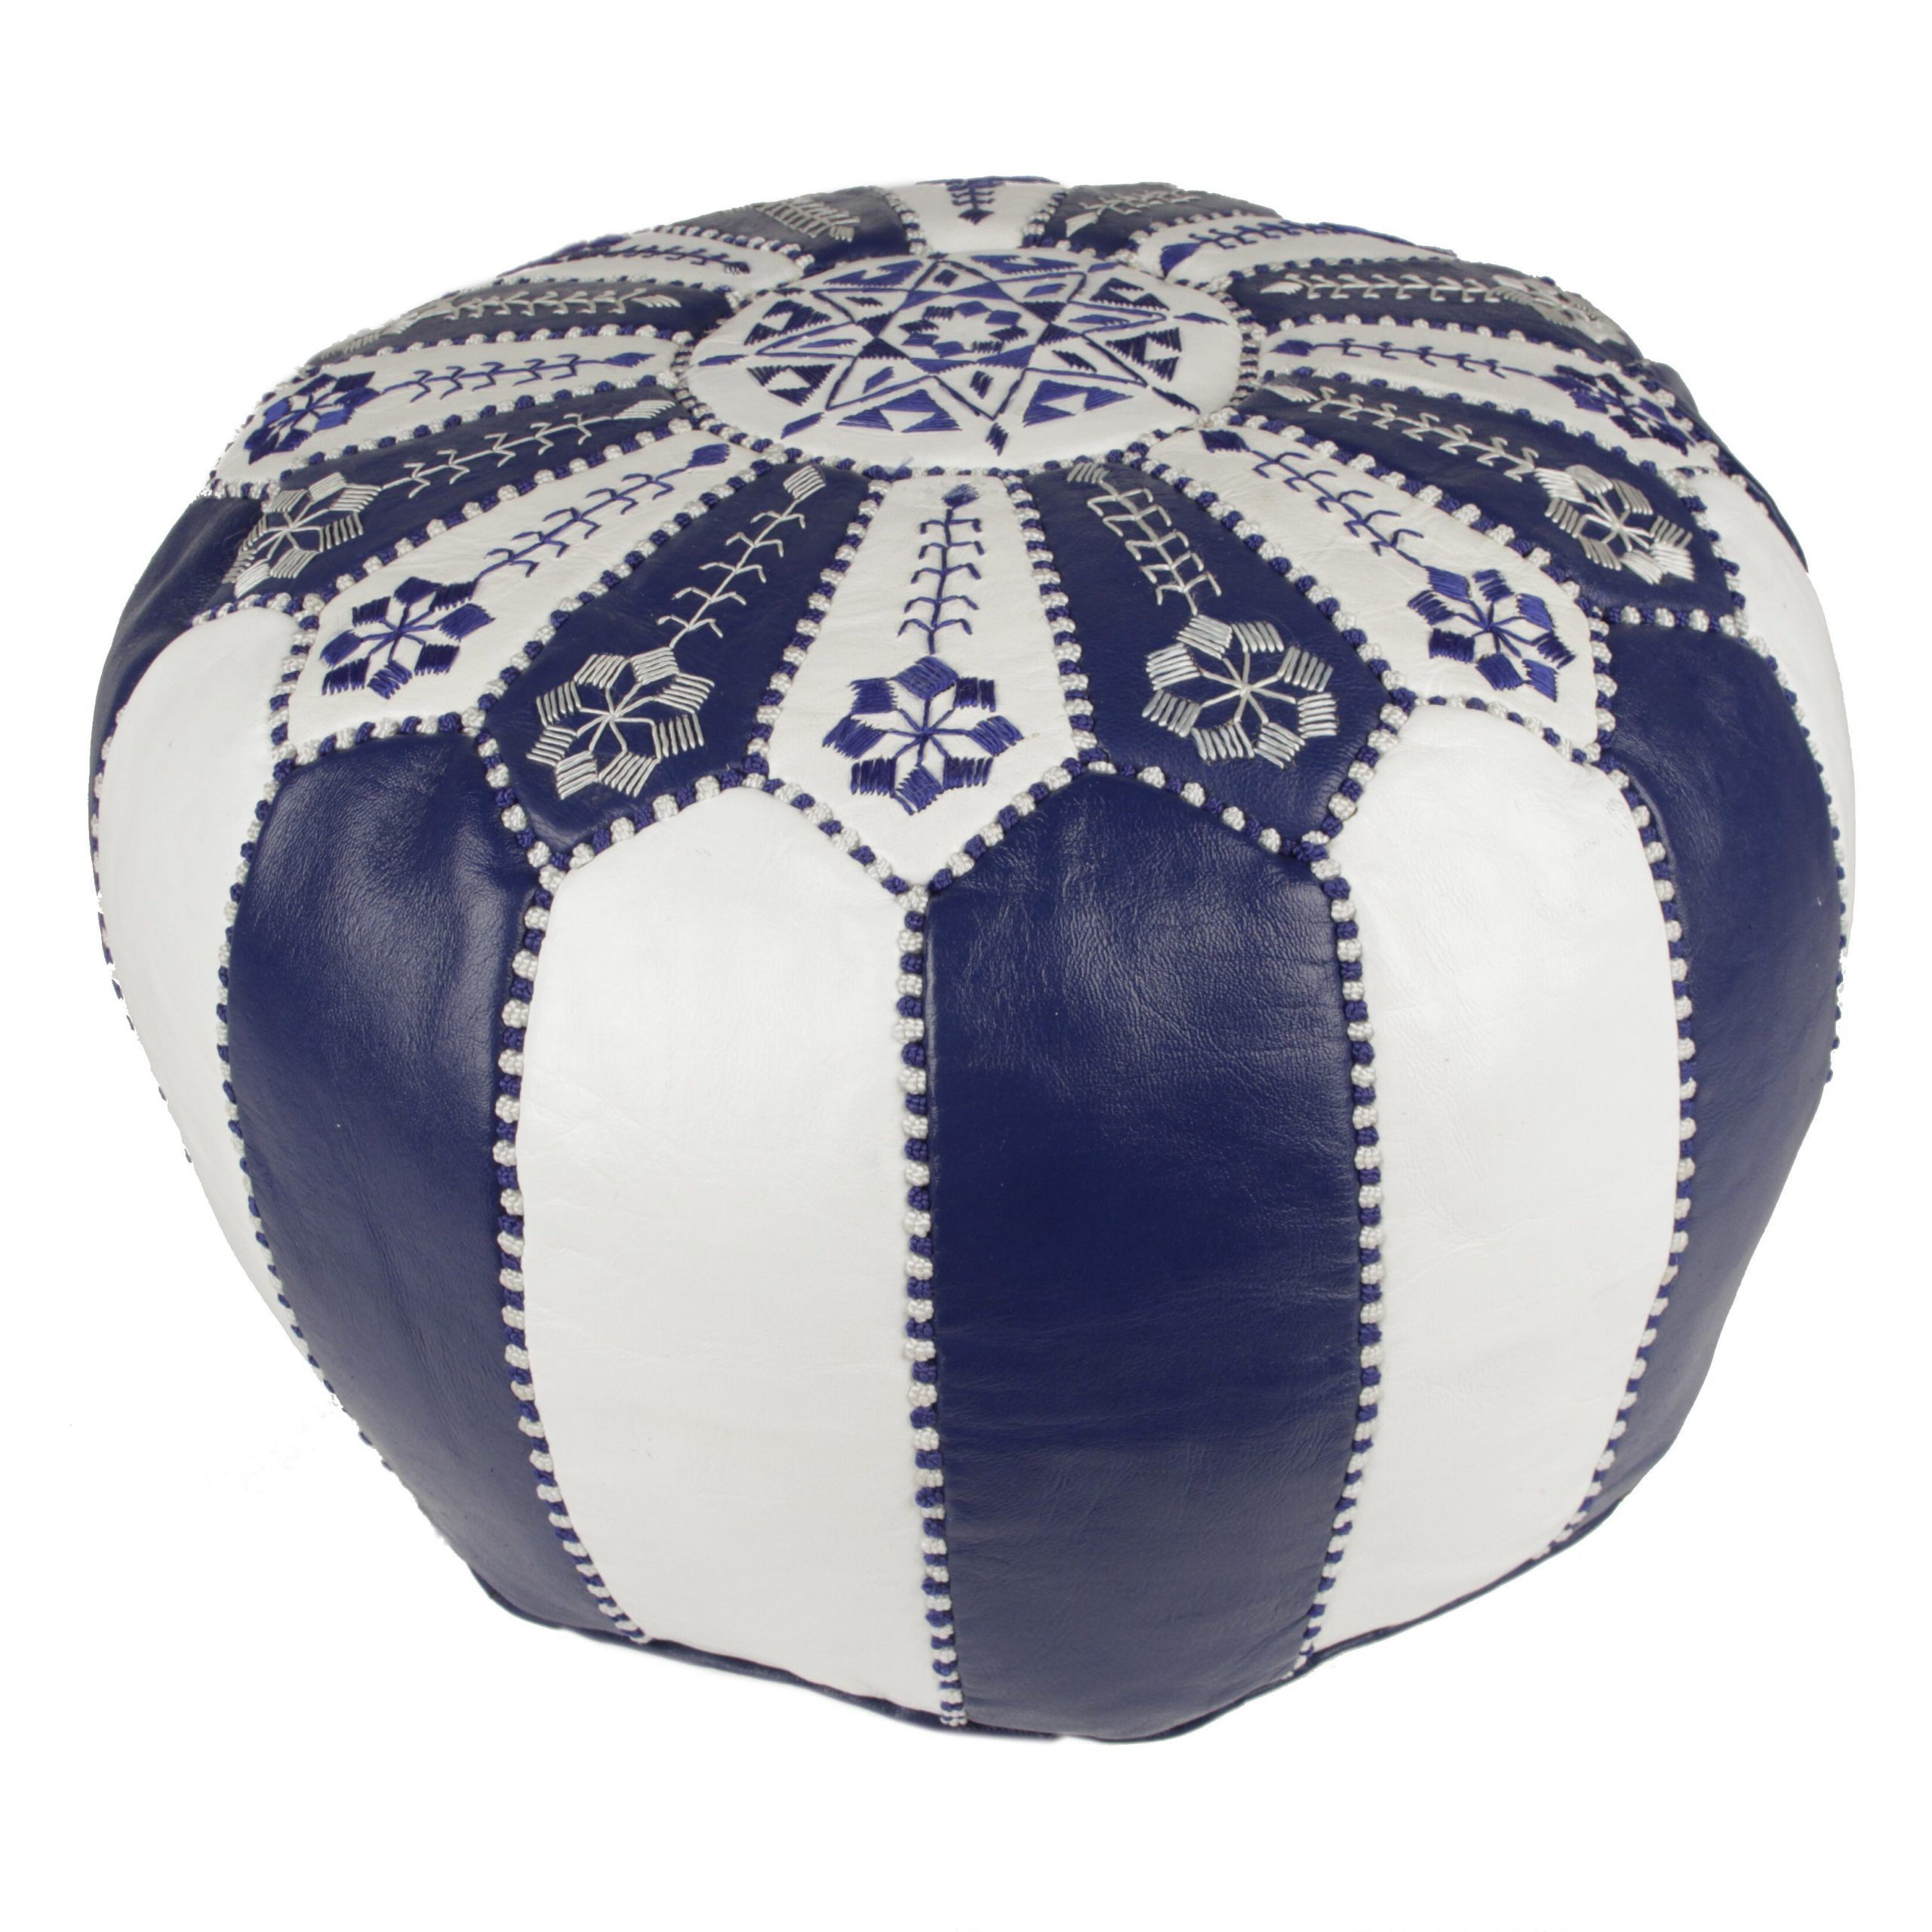 Wayfair Regarding Well Known Gray Moroccan Inspired Pouf Ottomans (View 6 of 10)